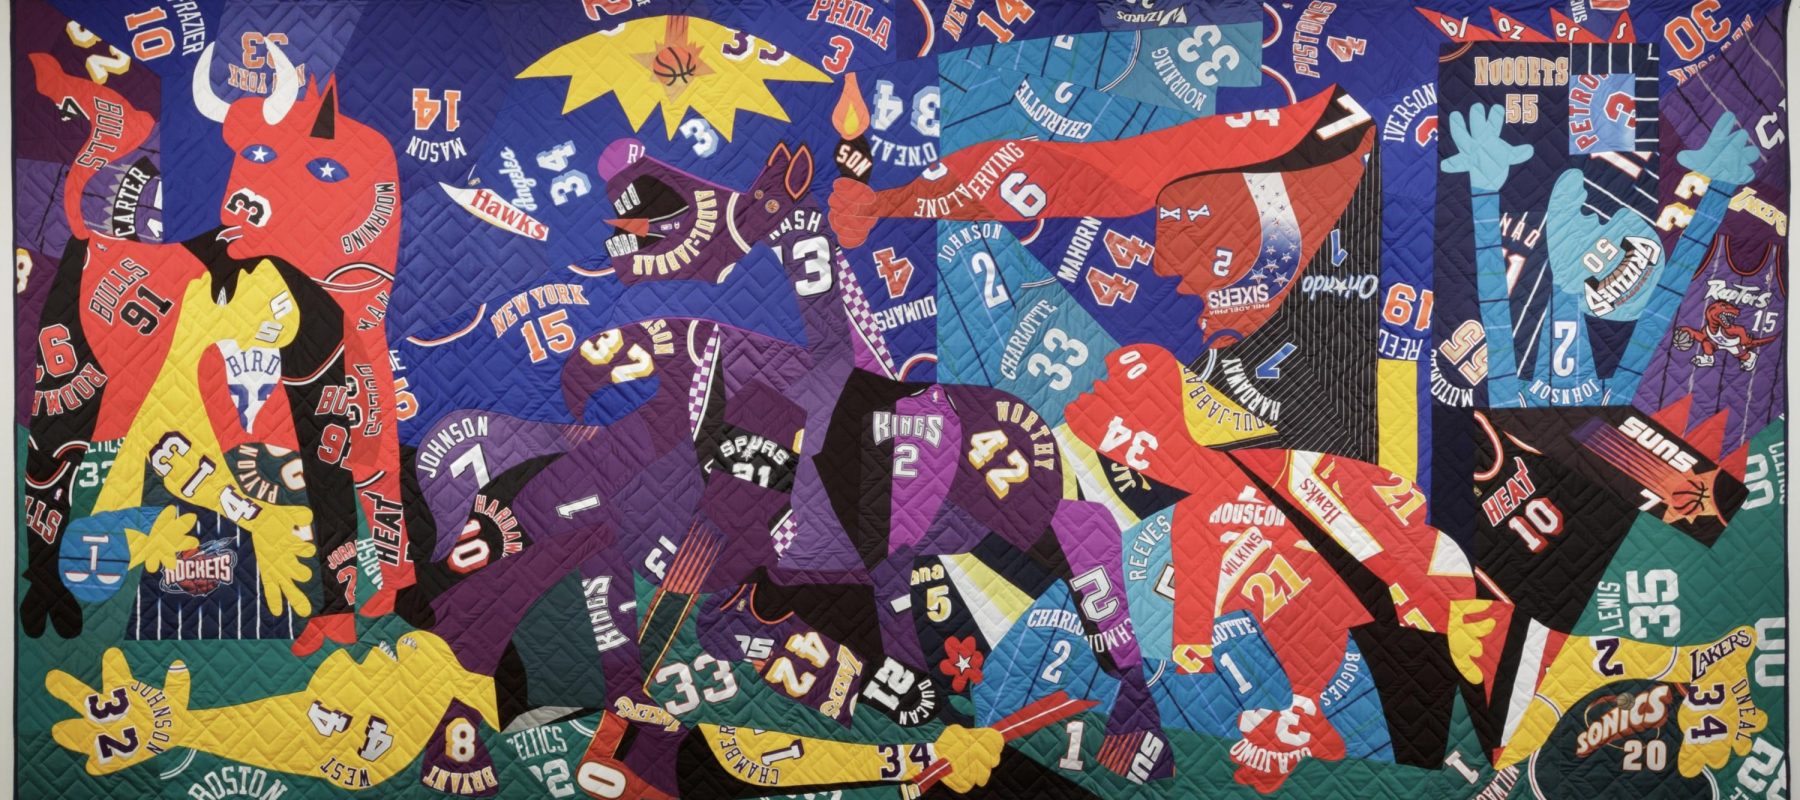 Many sports jerseys are sewn together into a quilt that is a version of Pablo Picasso's painting, Guernica.